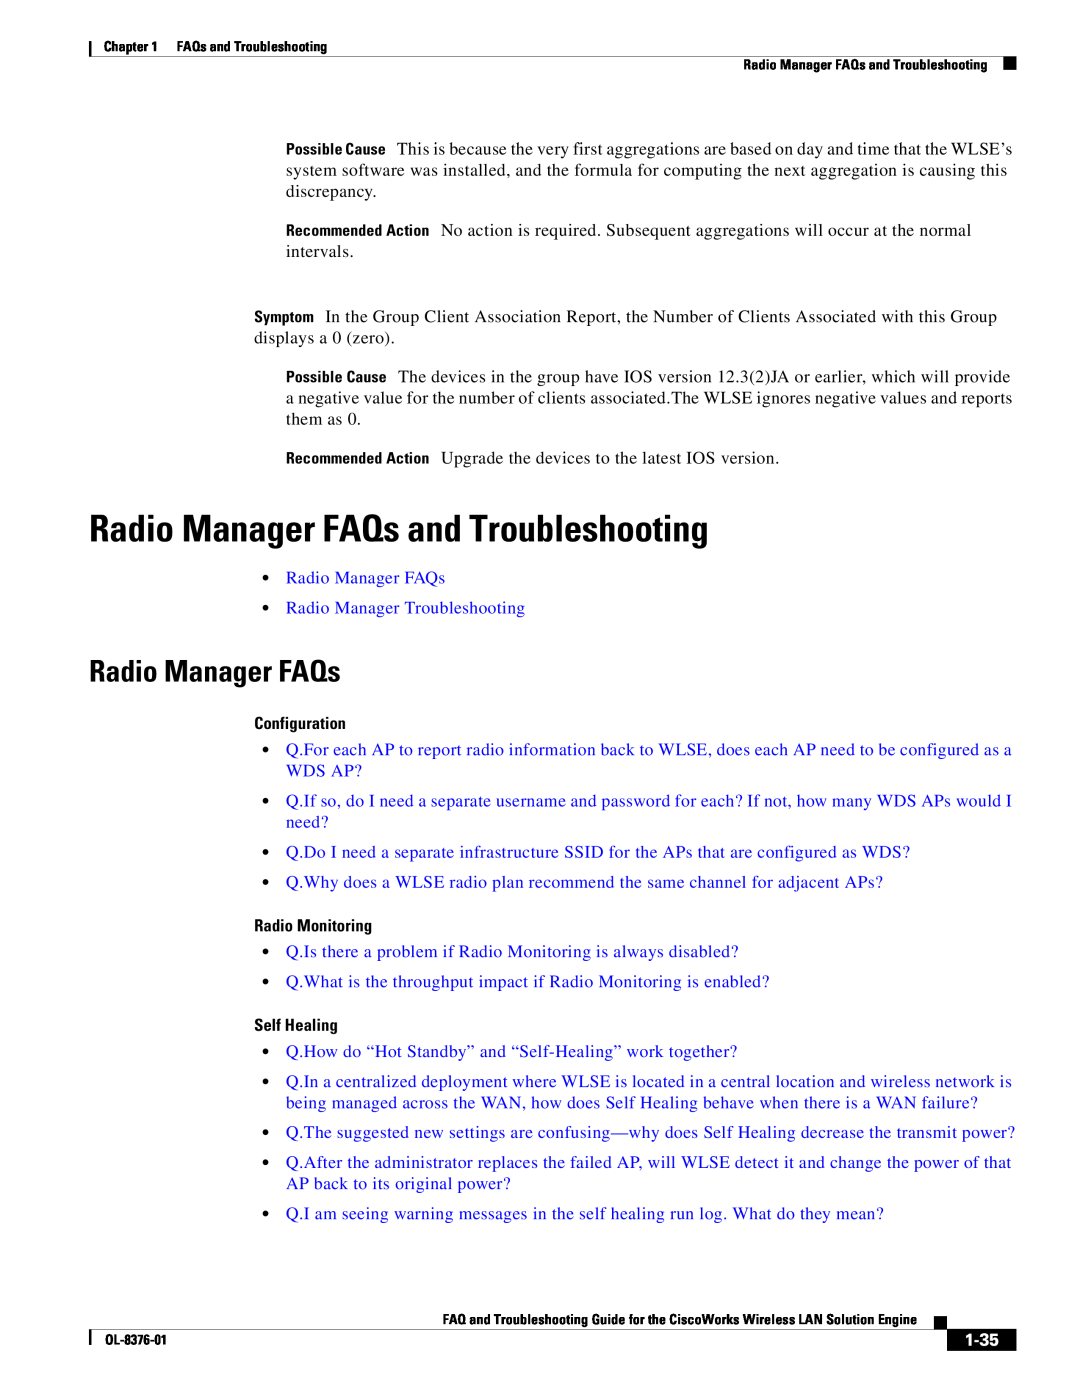 Cisco Systems OL-8376-01 manual Radio Manager FAQs and Troubleshooting, Configuration, Radio Monitoring, Self Healing, 1-35 